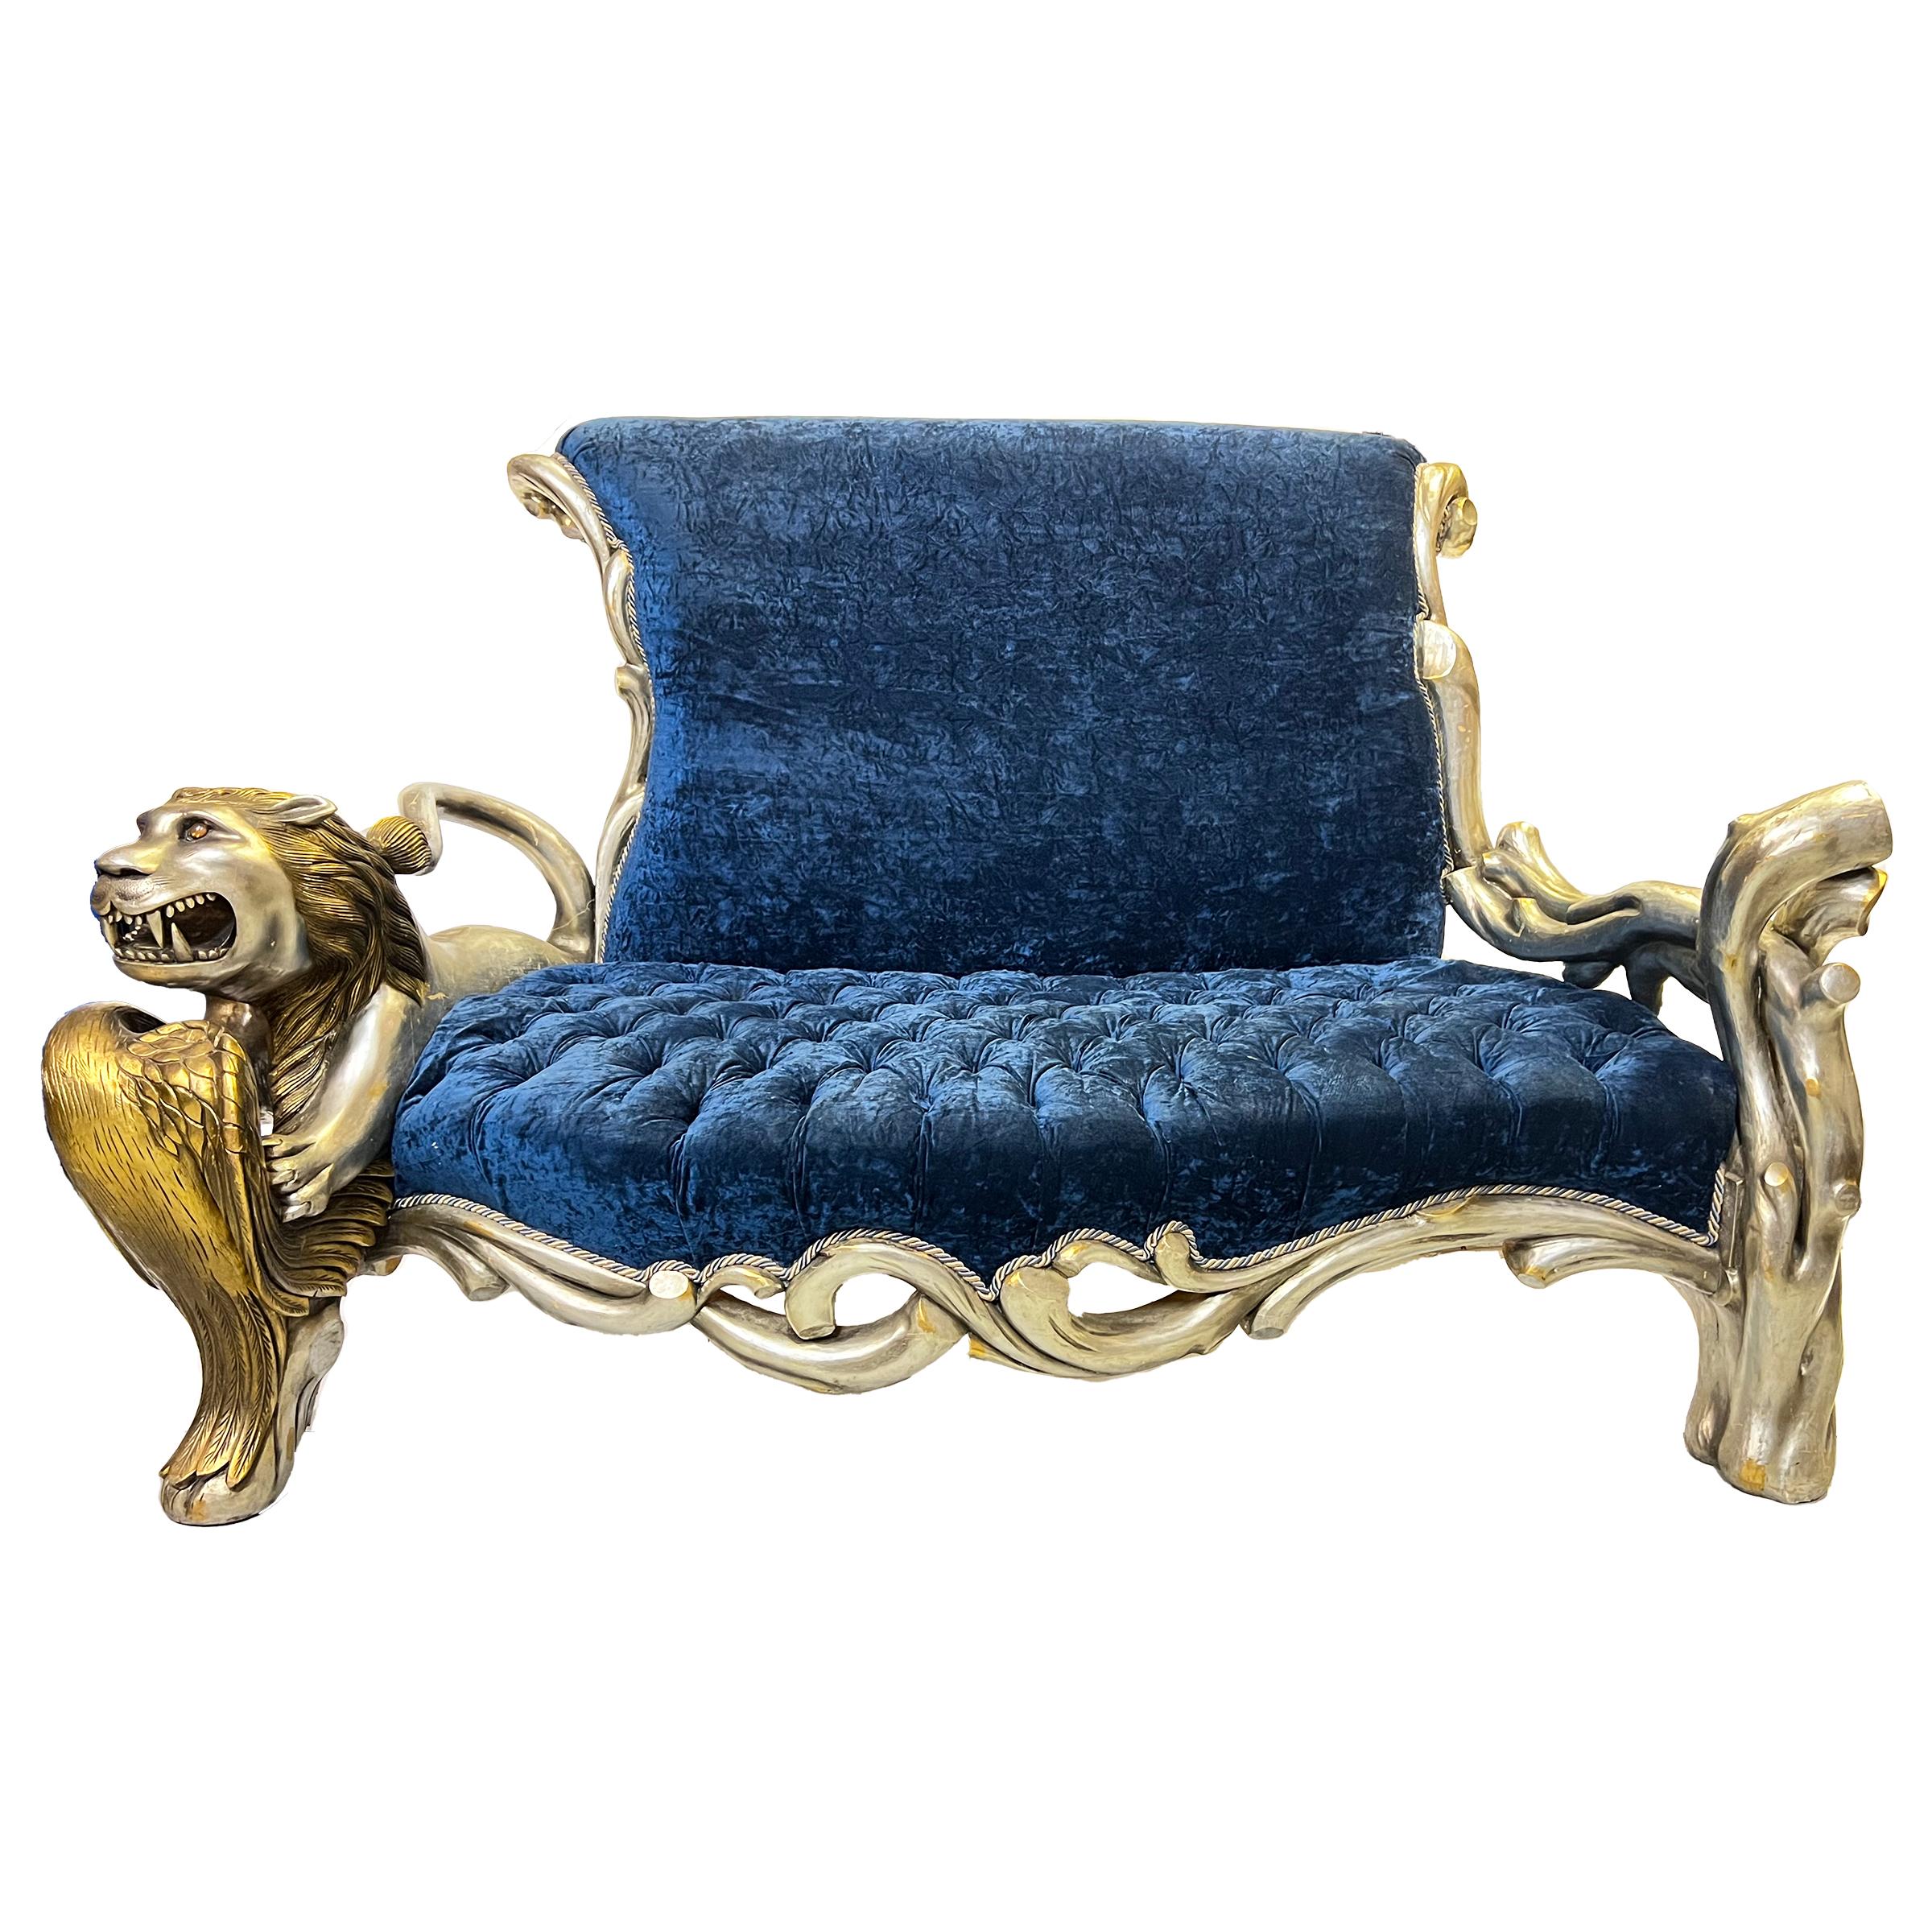 This stunning sofa features a blue velvet textile that is soft to the touch and adds a touch of luxury to any room. One side of the sofa features a playful design of lion and swan, while the other side features a more natural design of tree